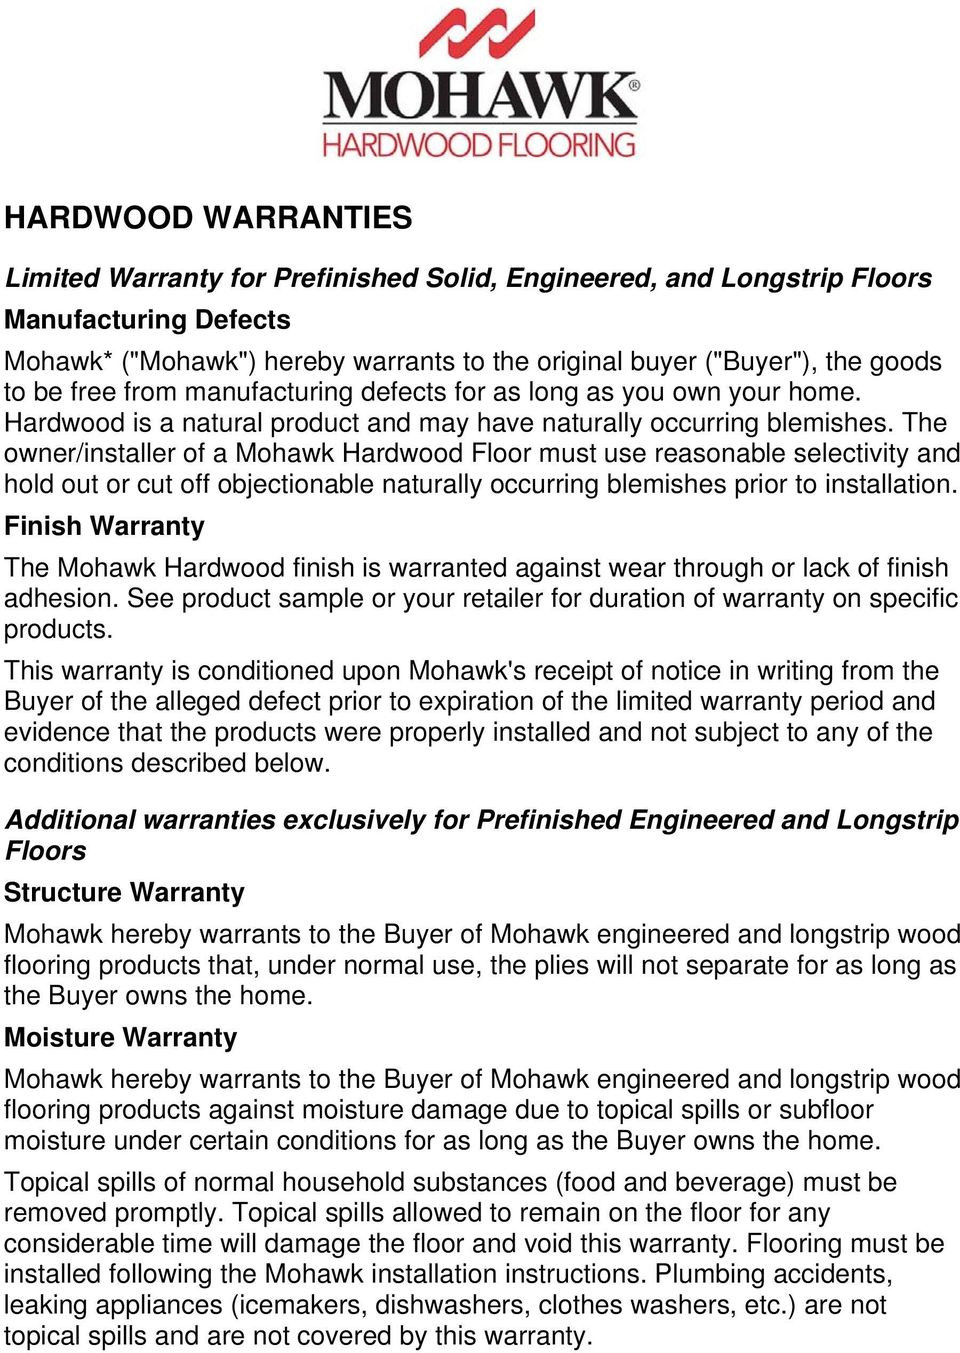 25 Famous Mohawk Hardwood Flooring Installation Guide 2024 free download mohawk hardwood flooring installation guide of hardwood warranties limited warranty for prefinished solid with the owner installer of a mohawk hardwood floor must use reasonable selectivity 